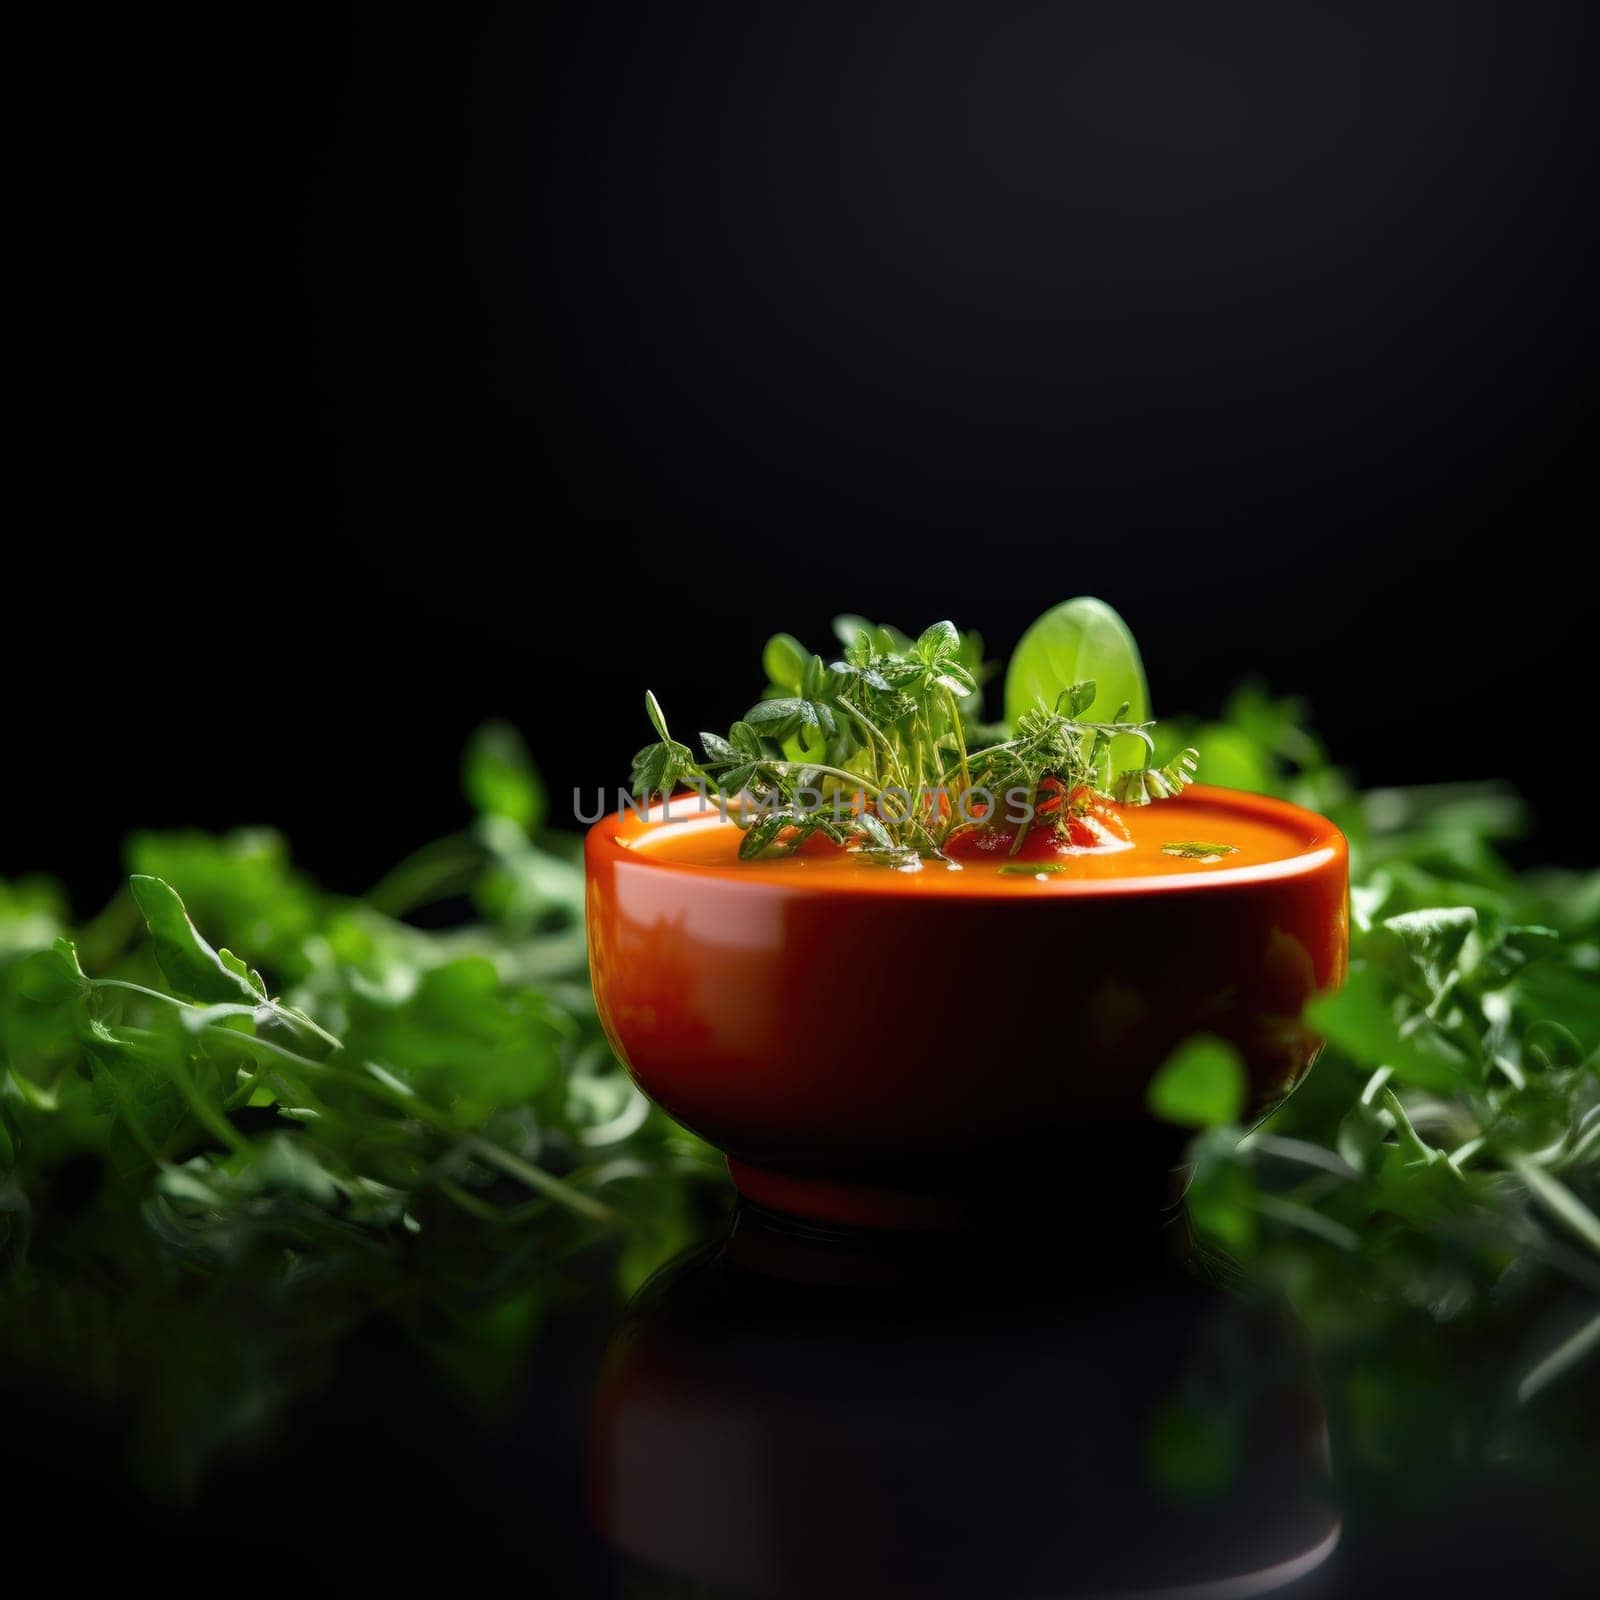 A bowl of soup with fresh greens on a black background